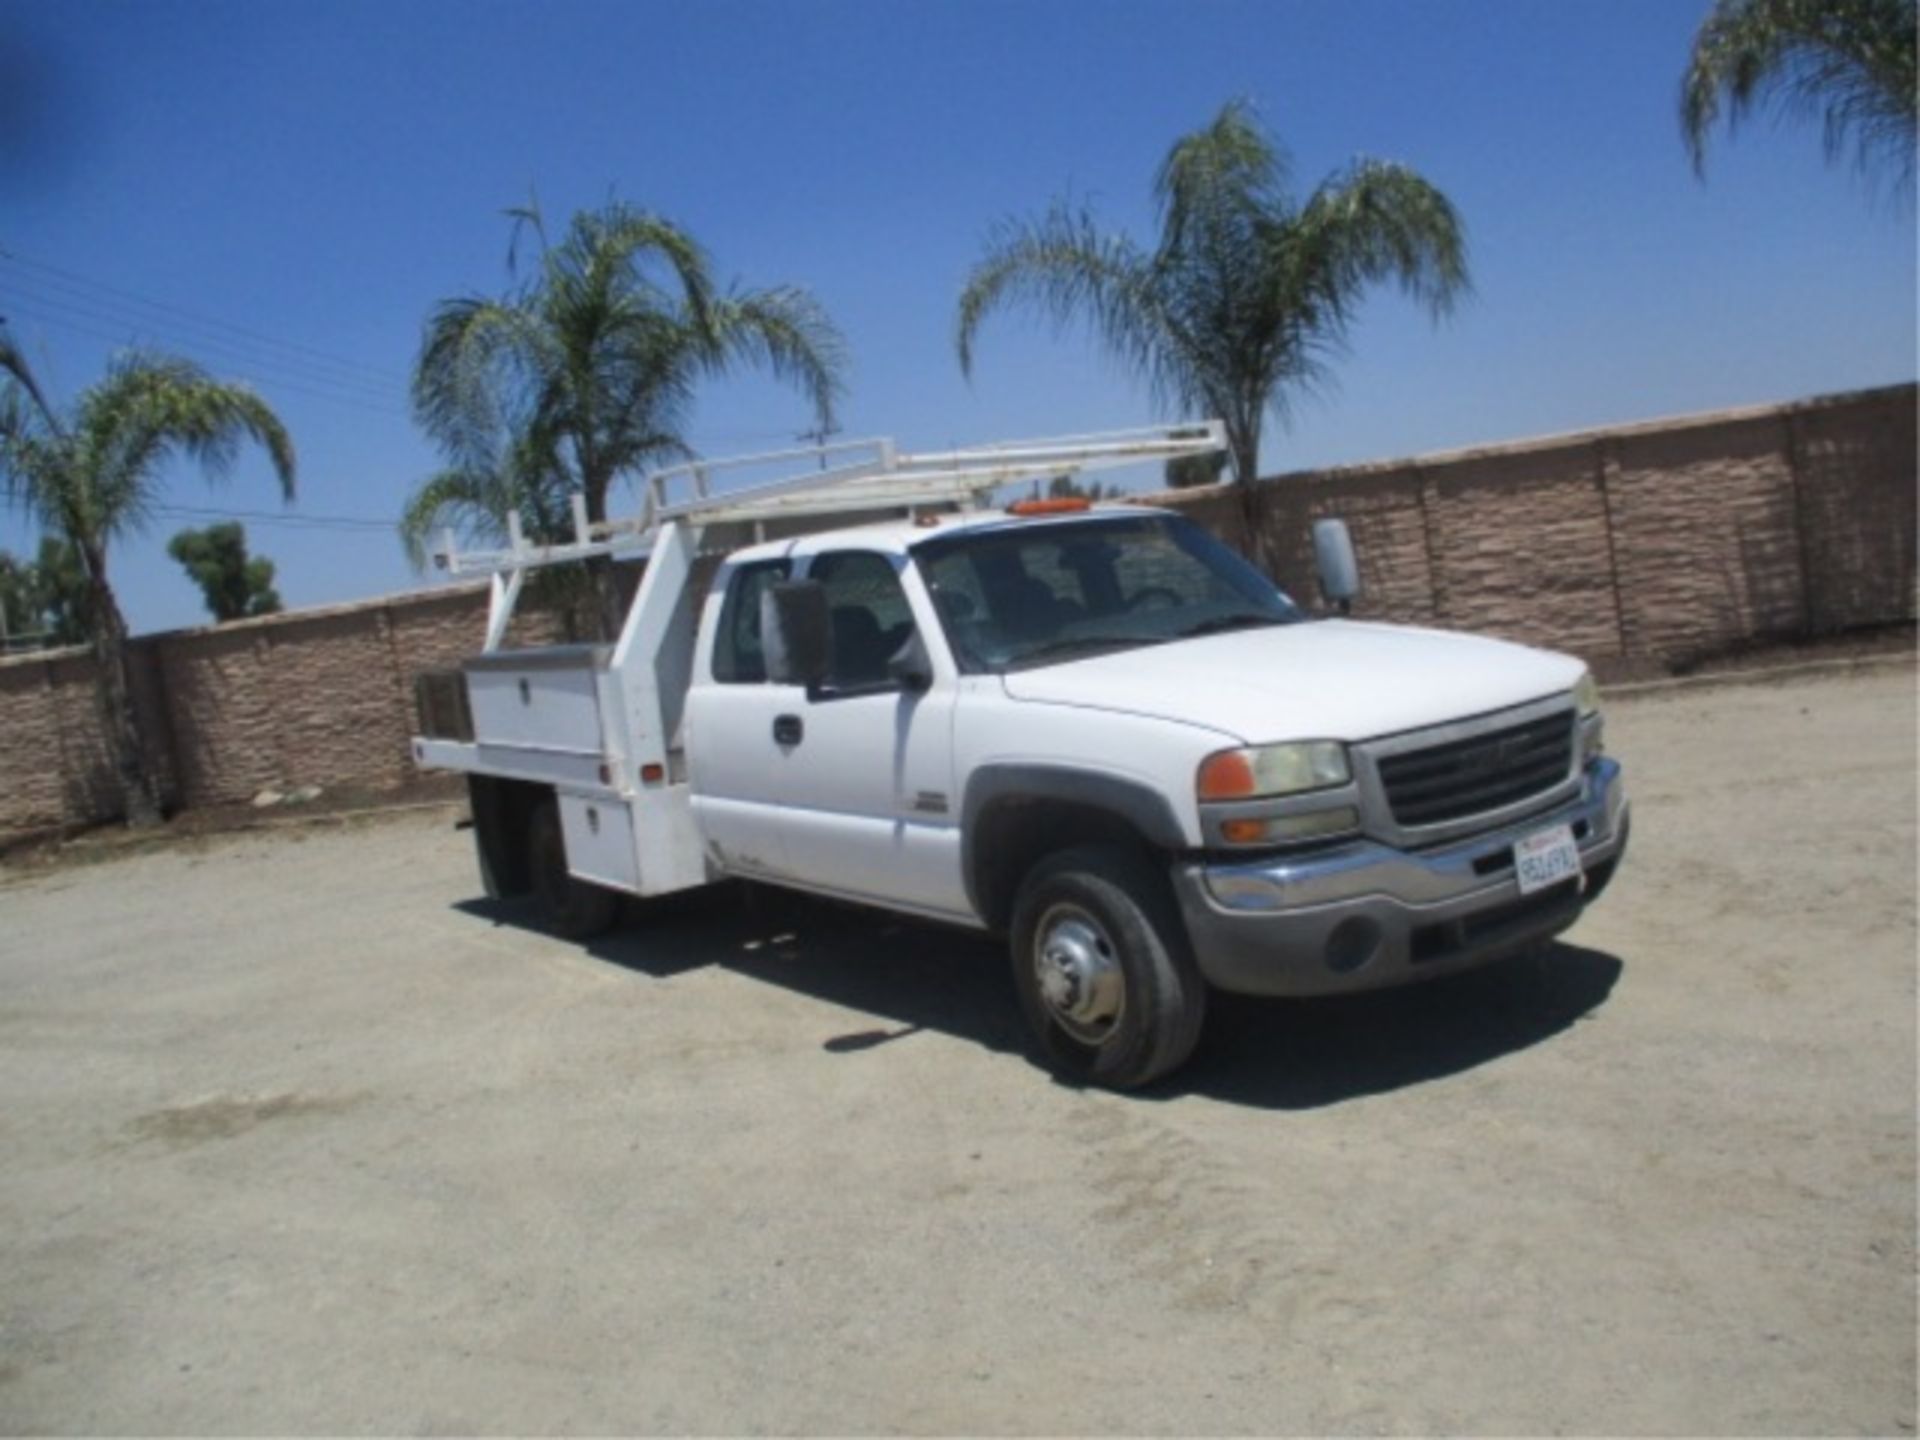 2006 Chevrolet 3500 Extended-Cab Utility Truck, 6.6L Turbo Diesel, Automatic, Tool Boxes, Lumber - Image 6 of 71